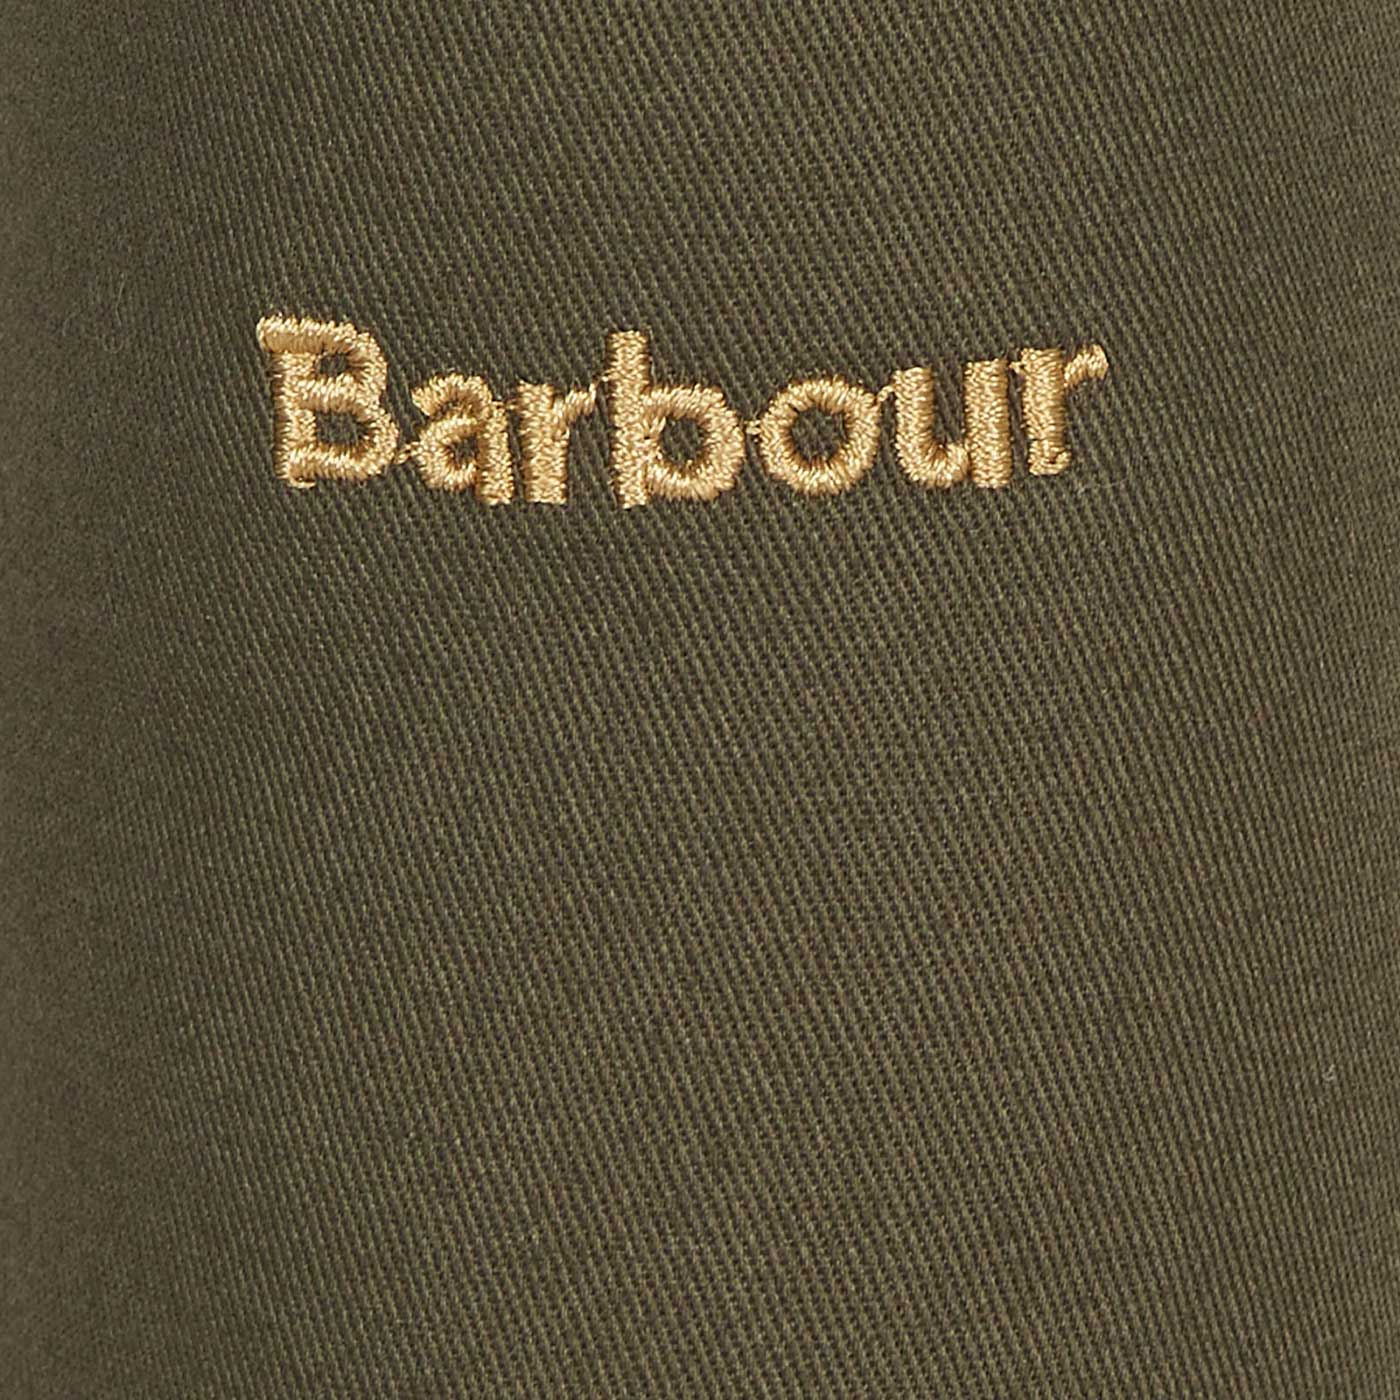 Barbour Wellington Boot Dog Toy